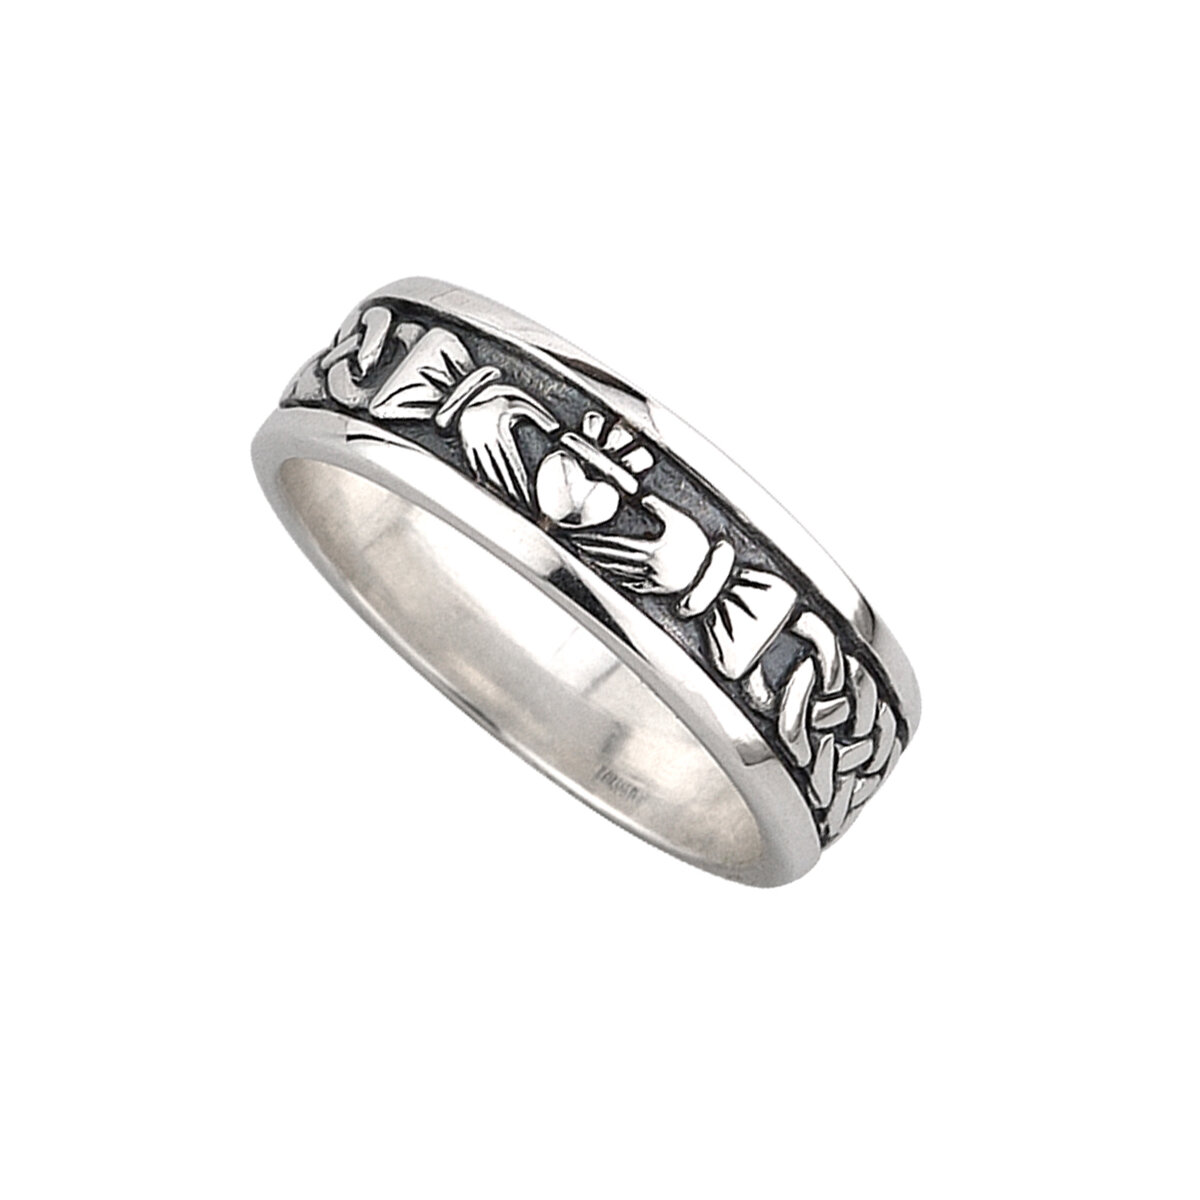 Sterling Silver Gents Oxidised Claddagh Ring - Solvar - Fallers.com -  Fallers Irish Jewelry